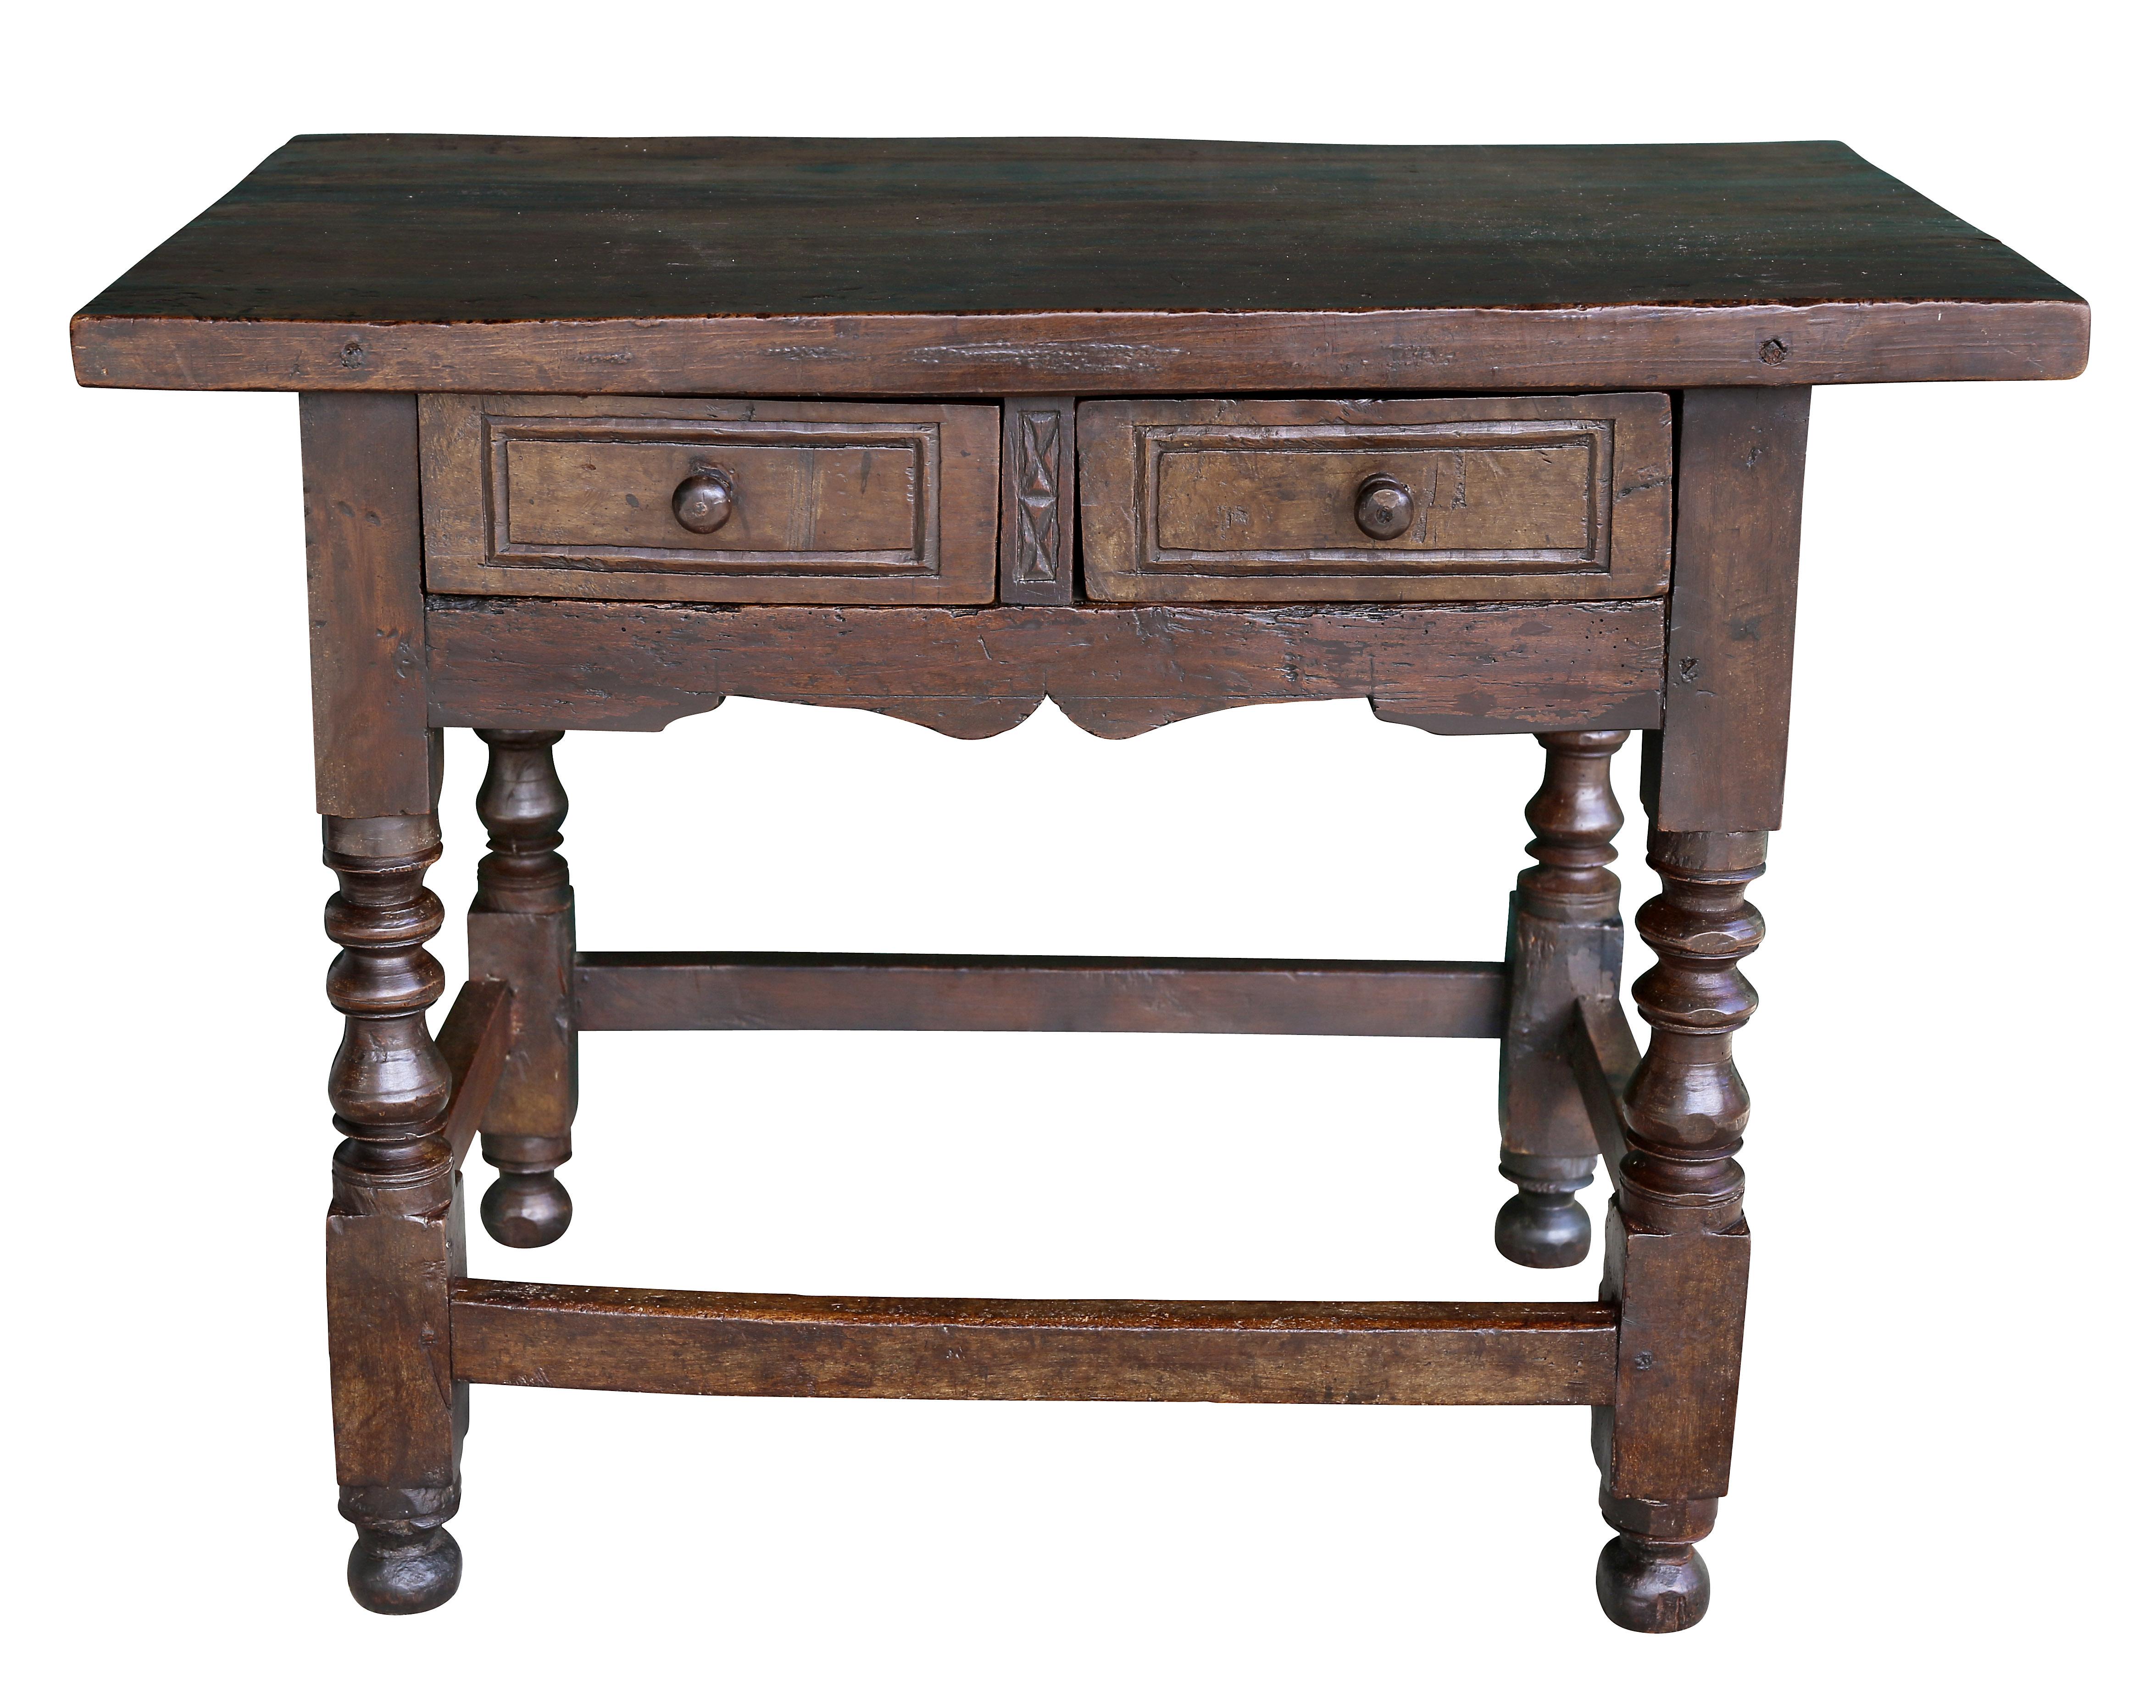 Rectangular top over two drawers with geometric carved drawer divider, raised on turned legs with a box stretcher.